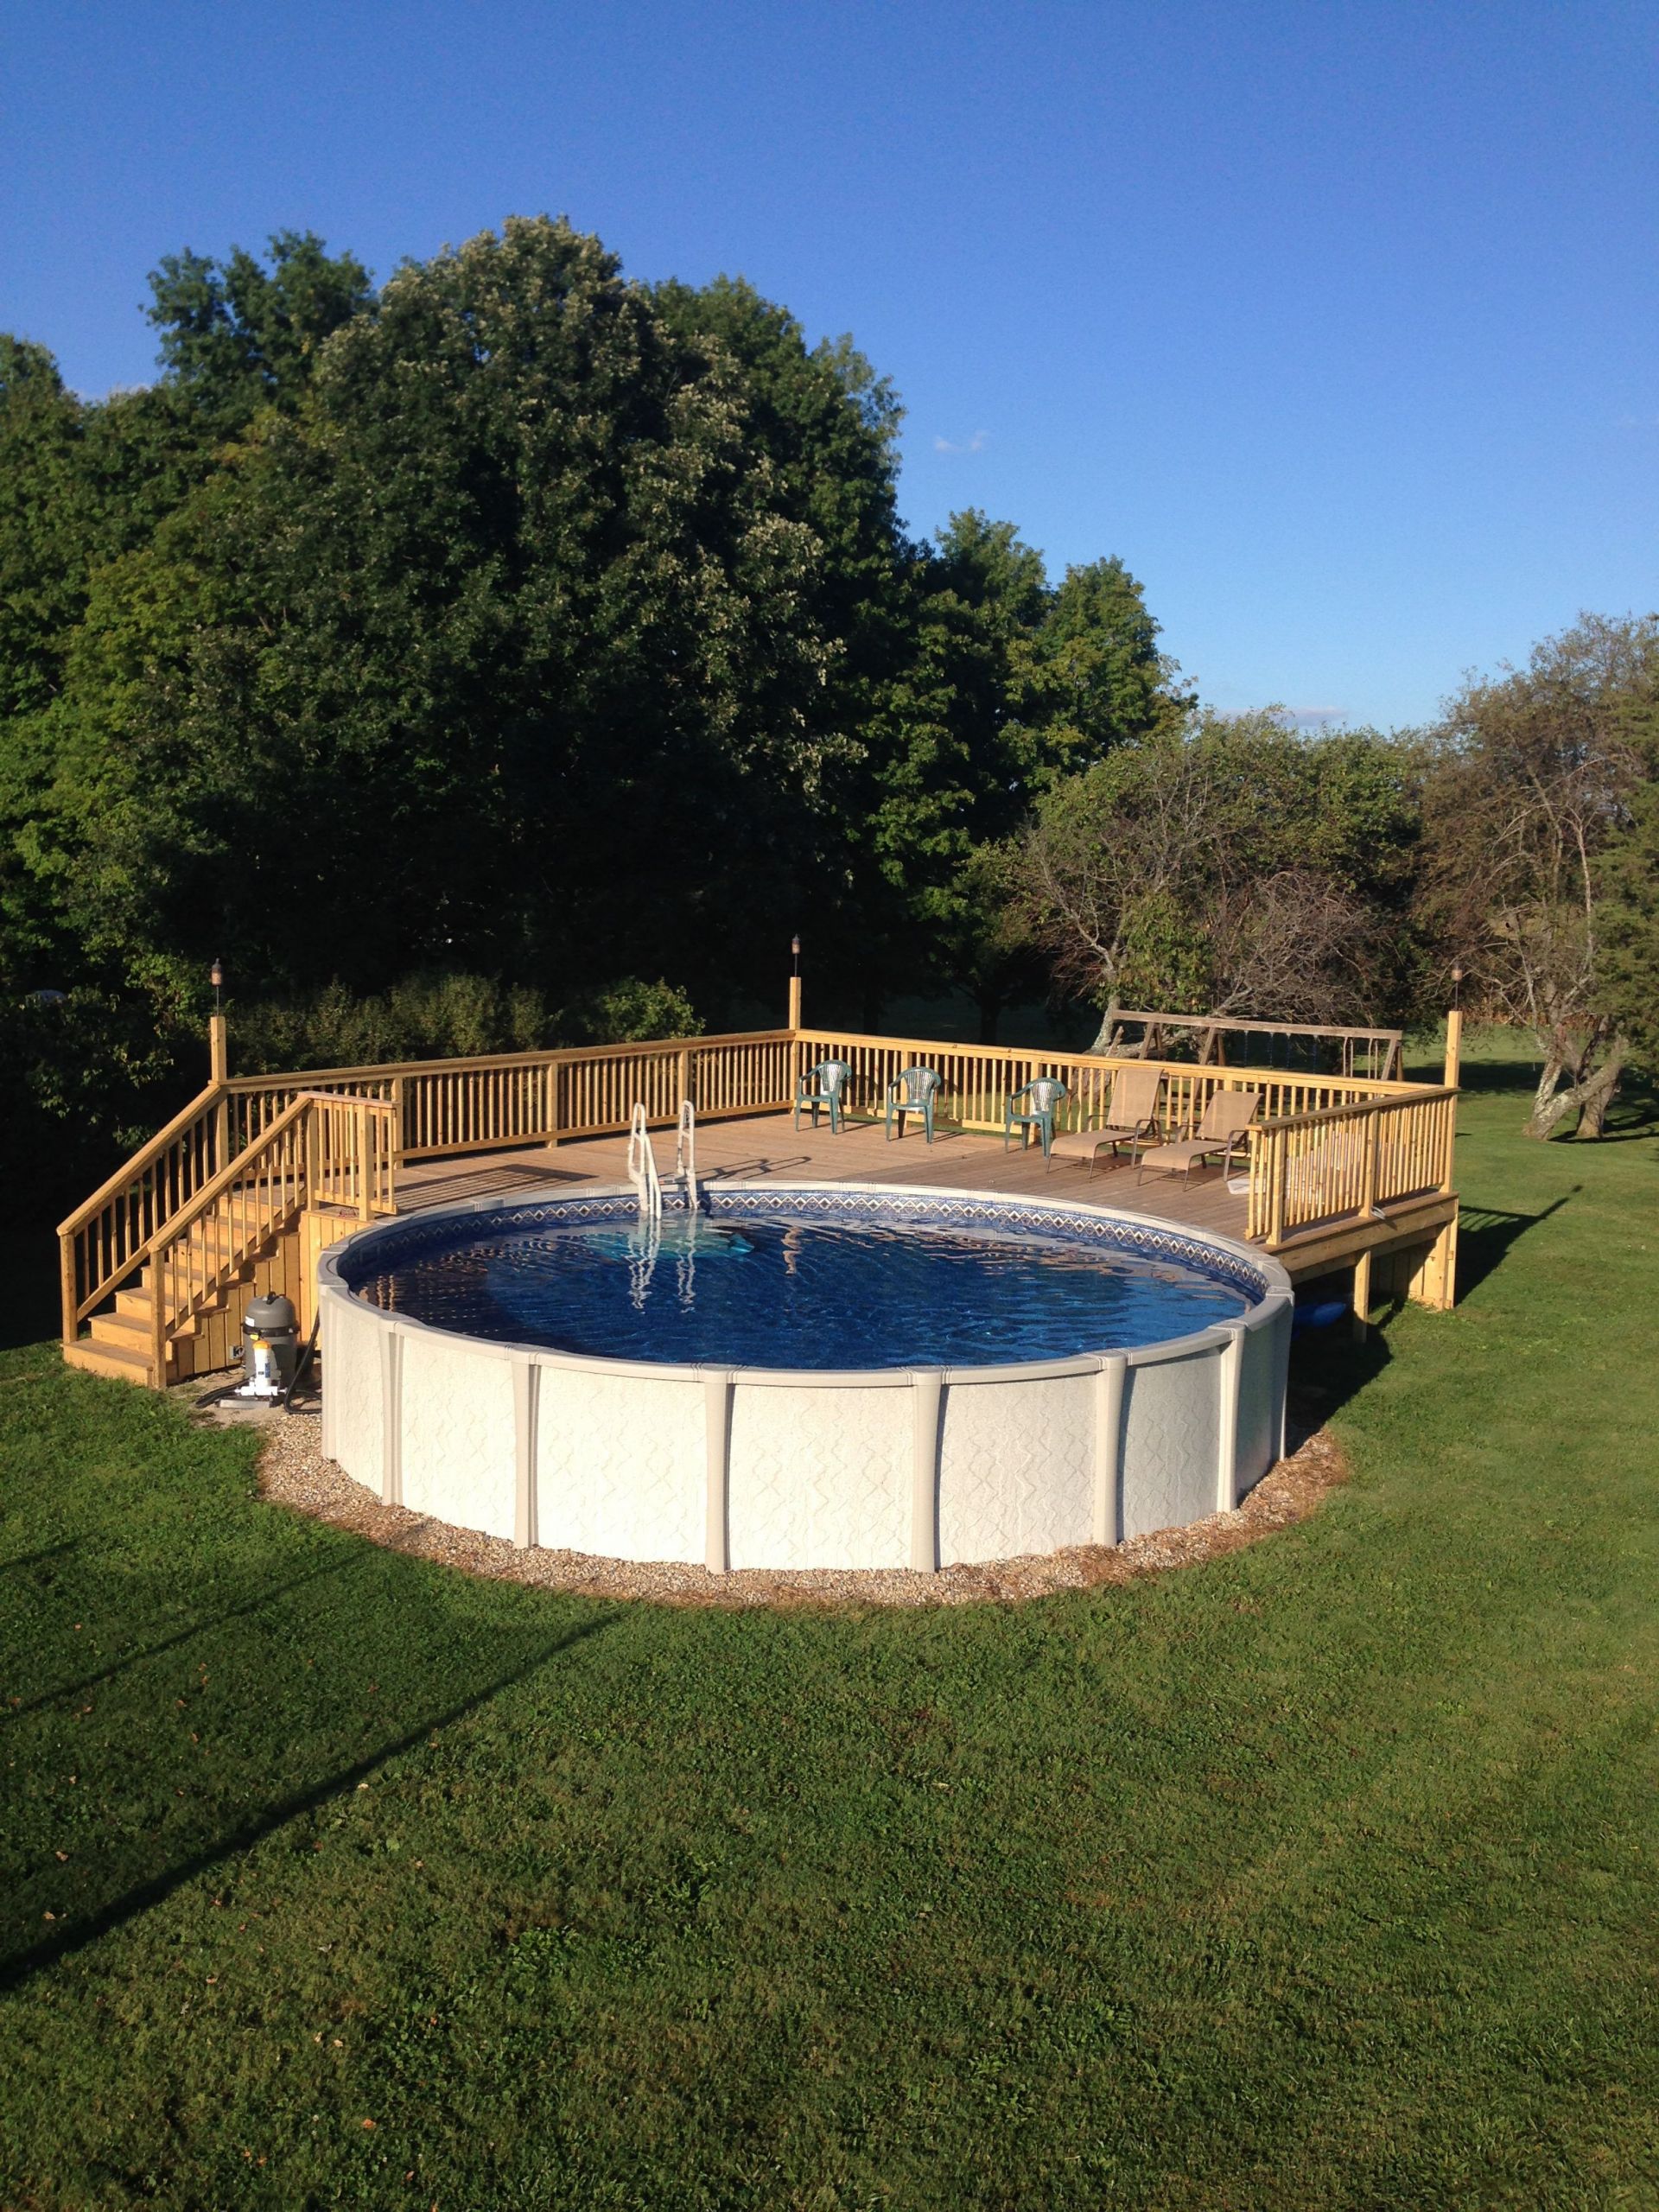 Above Ground Pool Deck Ideas
 ground pool deck for 24 ft round pool Deck is 28x28